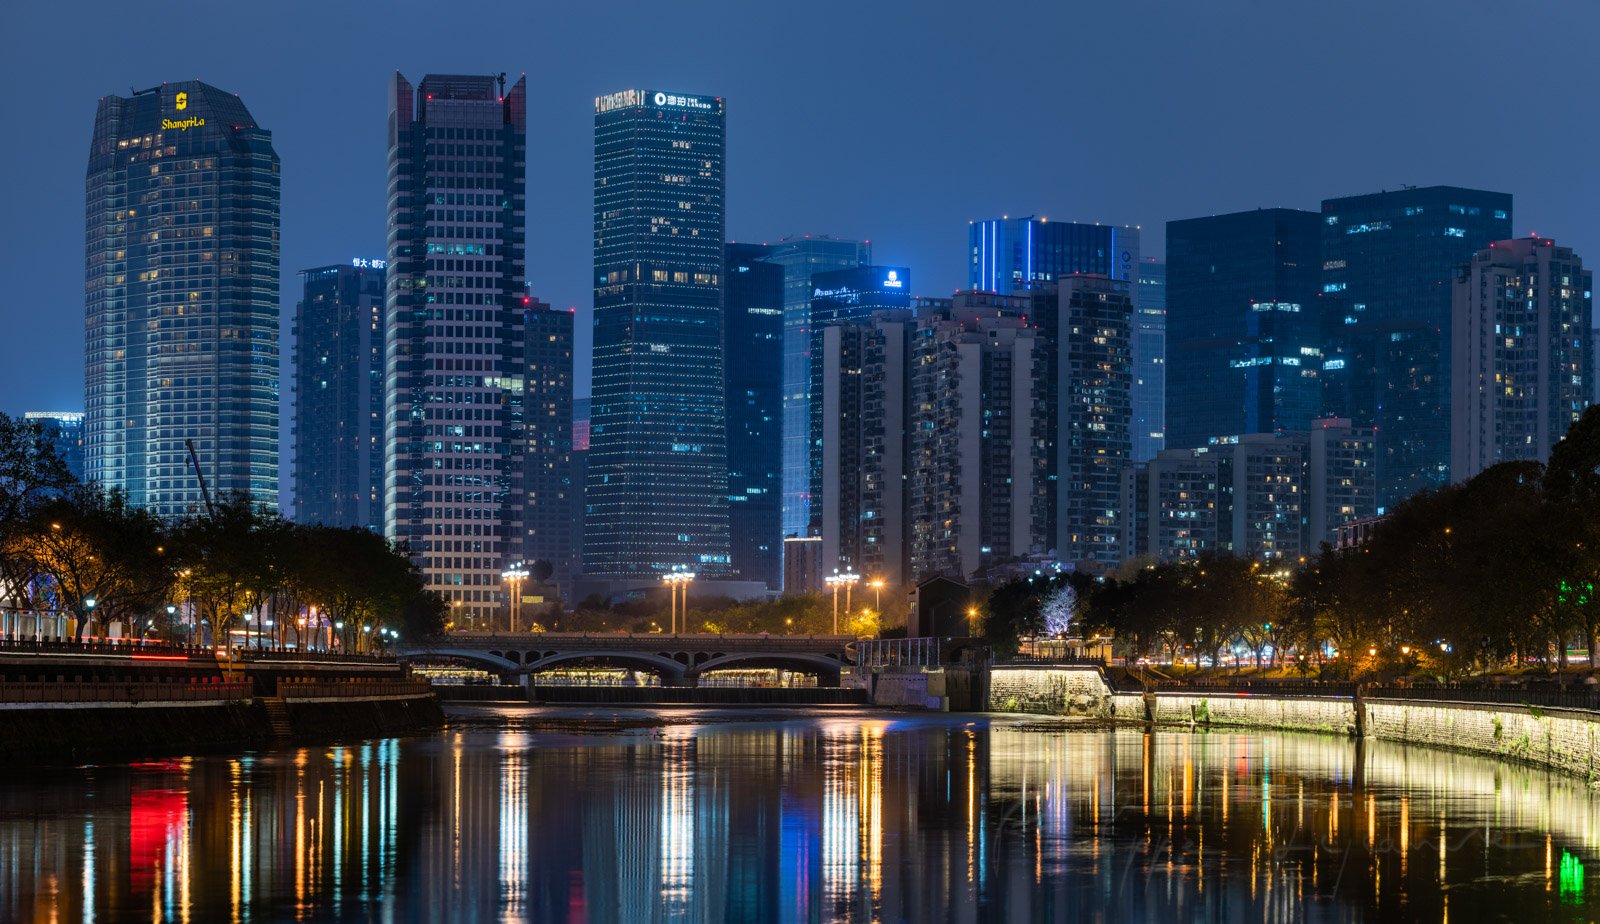 Chengdu city center skyline at night from Jinjiang river banks, Sichuan province, China